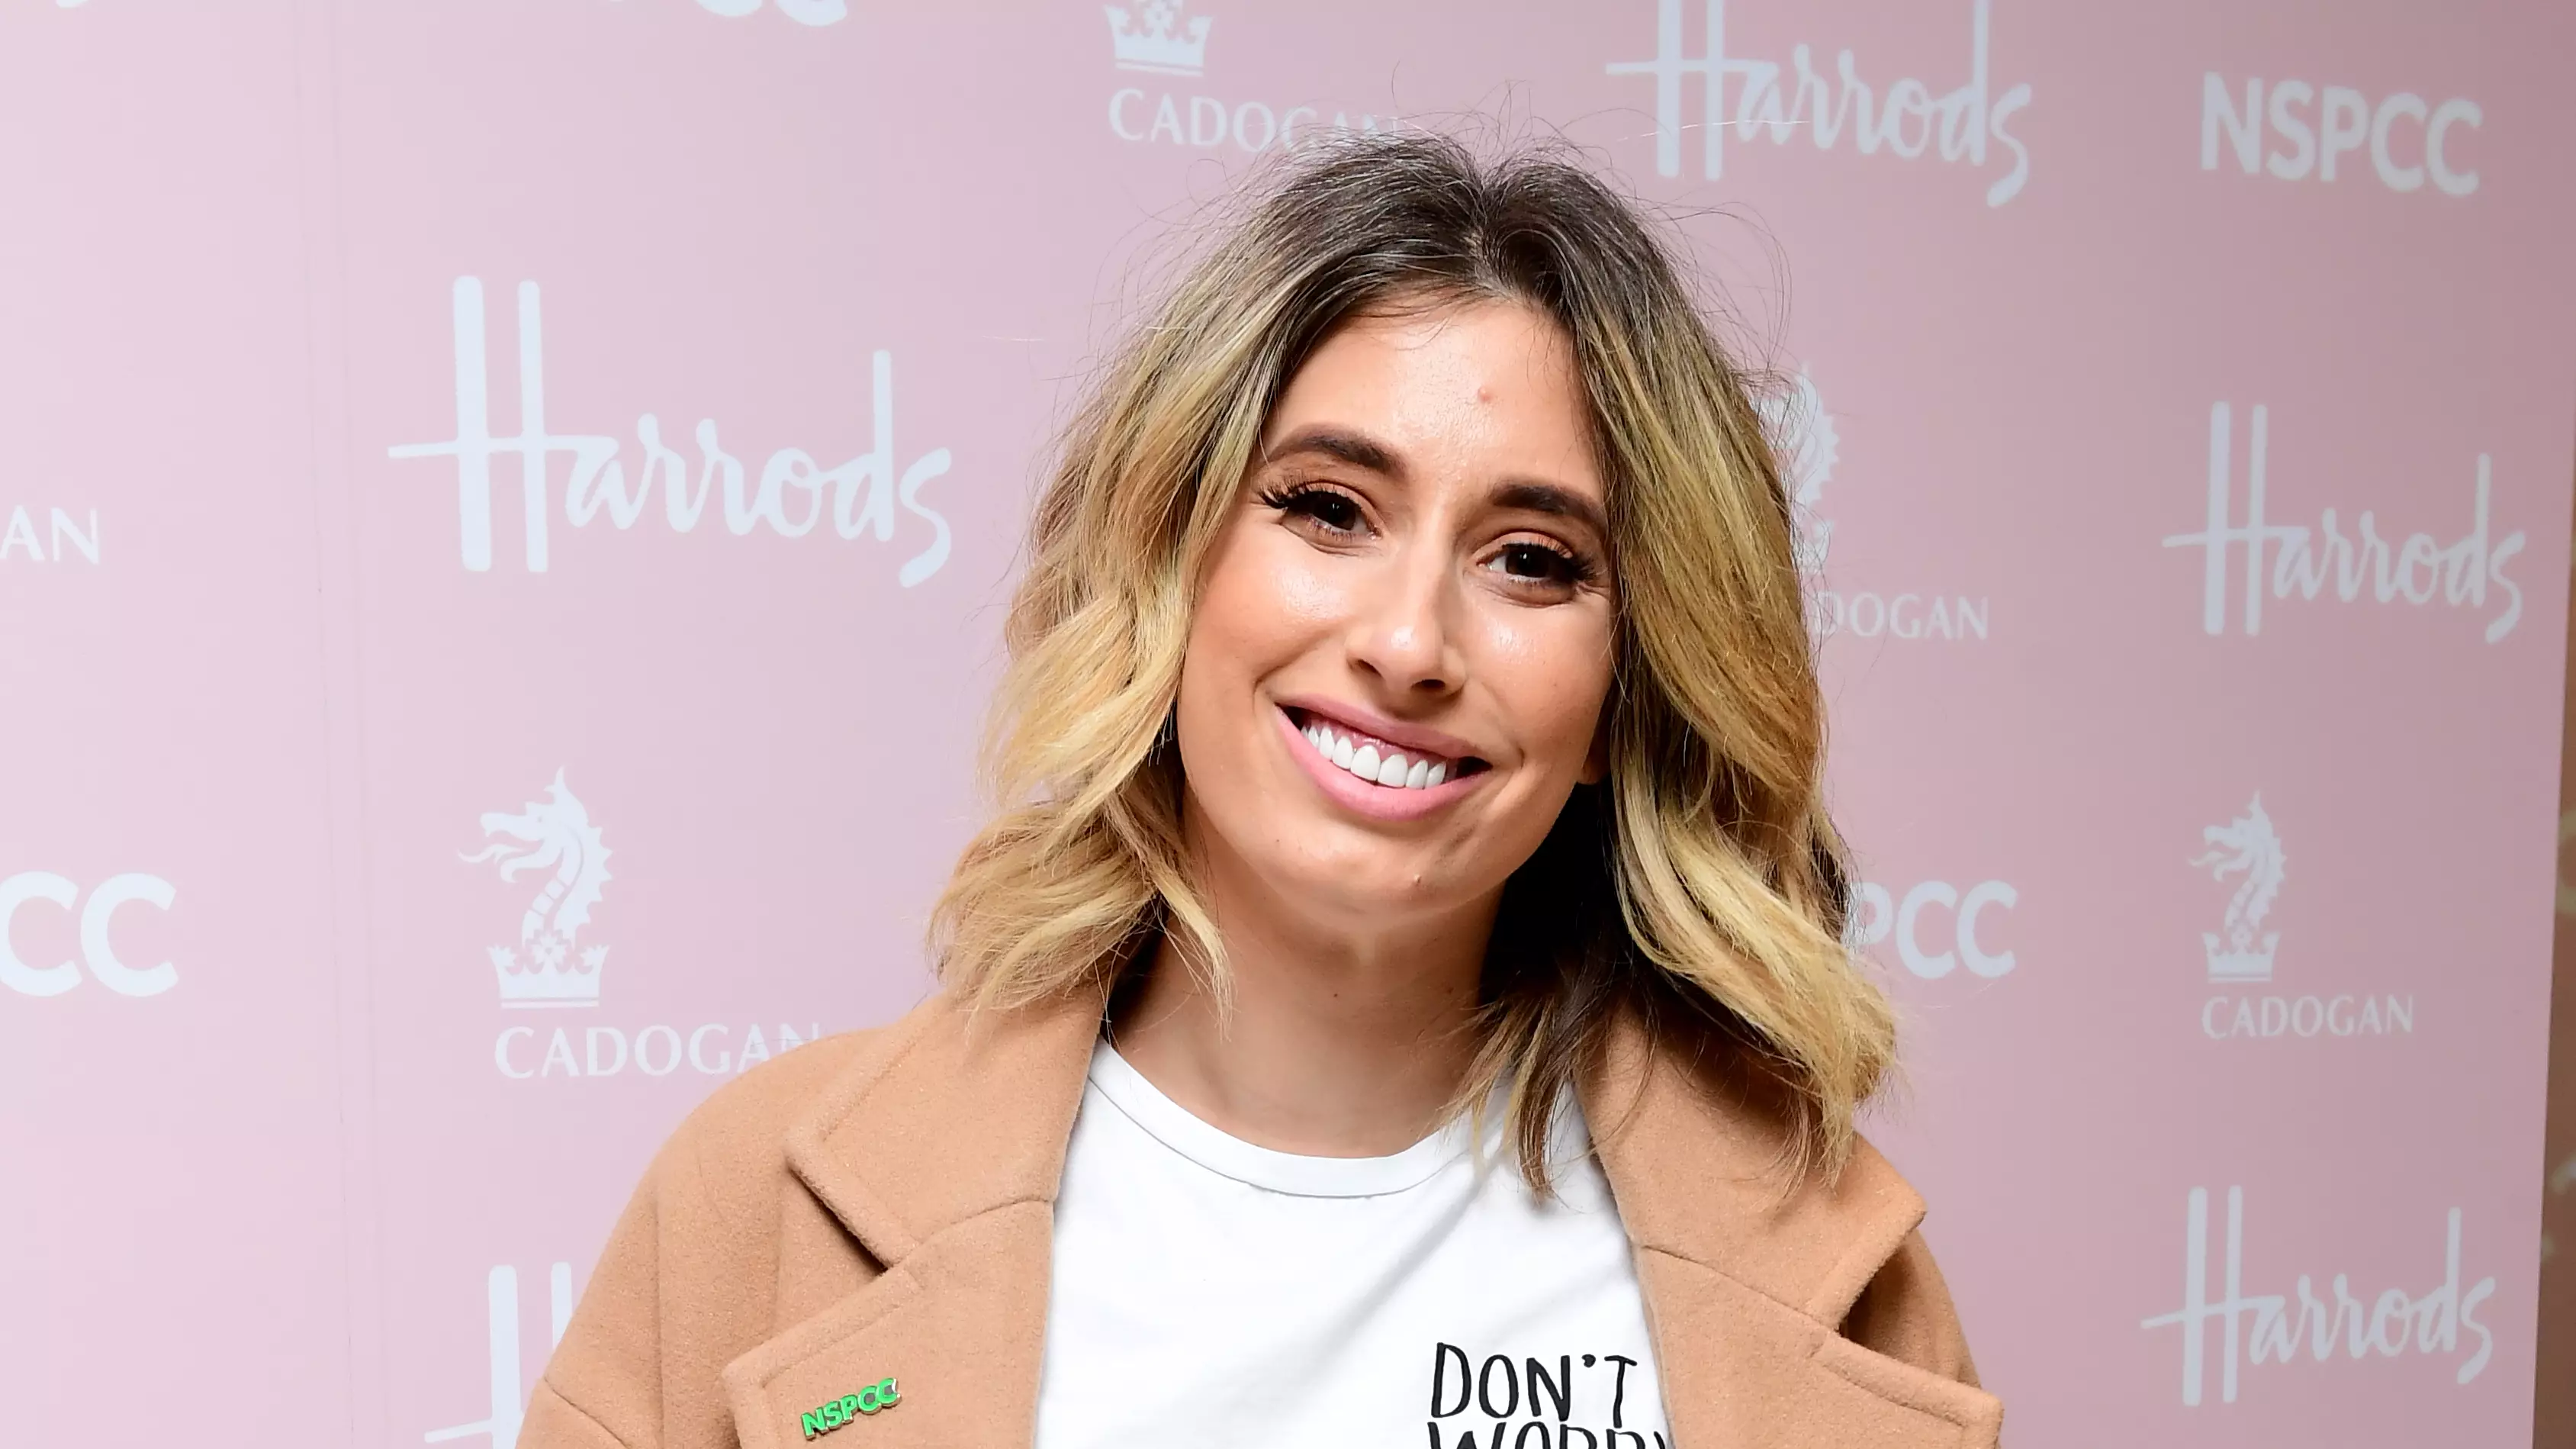 Stacey Solomon Brands Zara’s Clothing Sizes ‘Dangerous’ As She’s Forced To Buy A Large